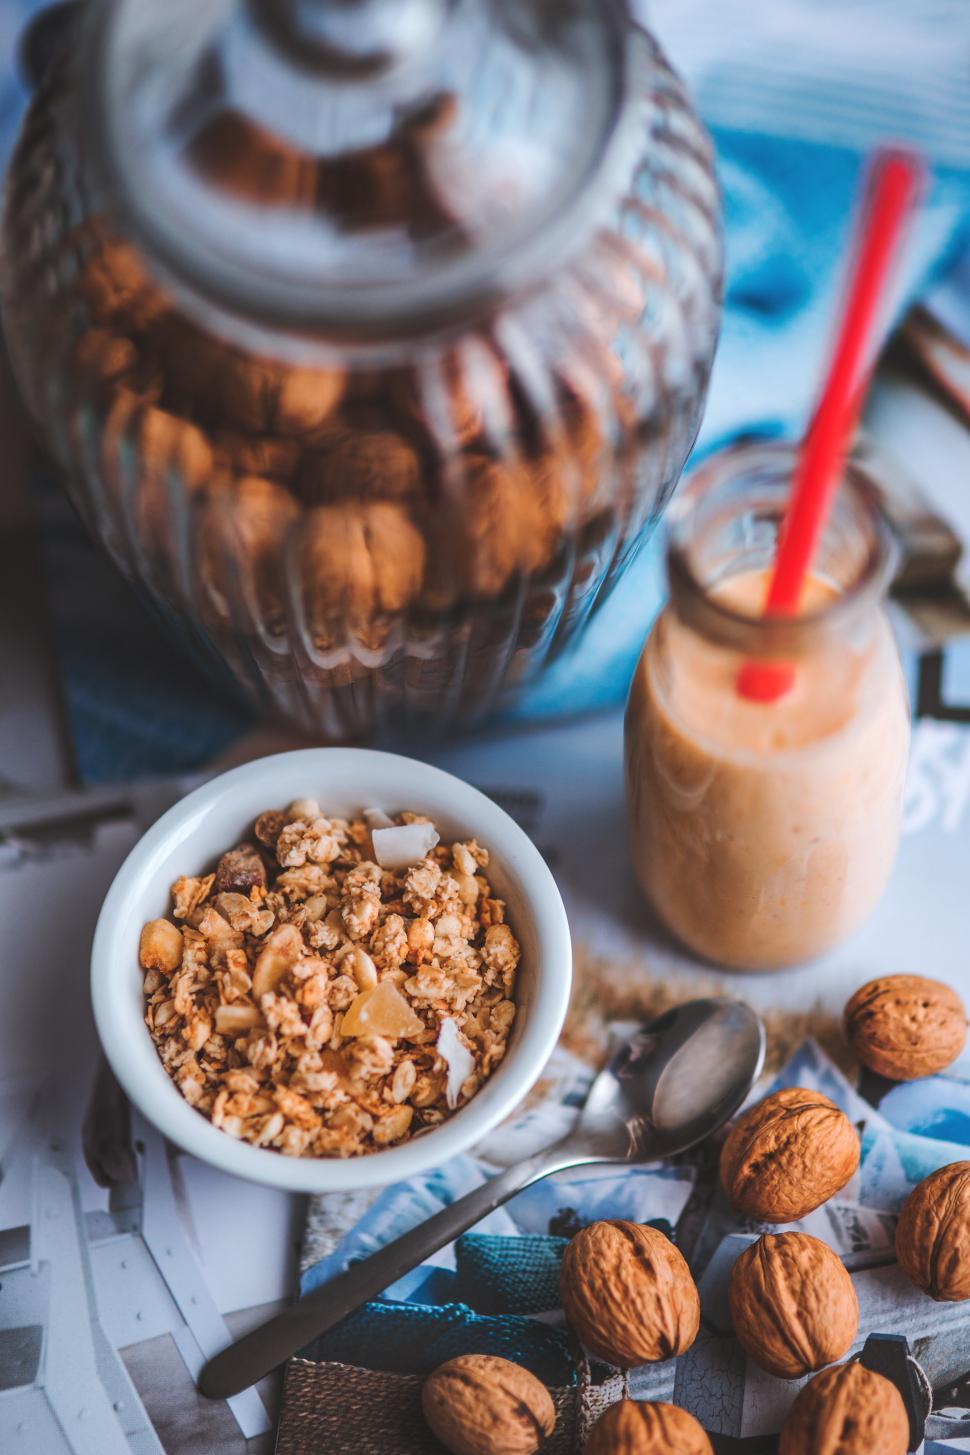 Free Image of Bowl of Nuts and Jar of Peanut Butter 